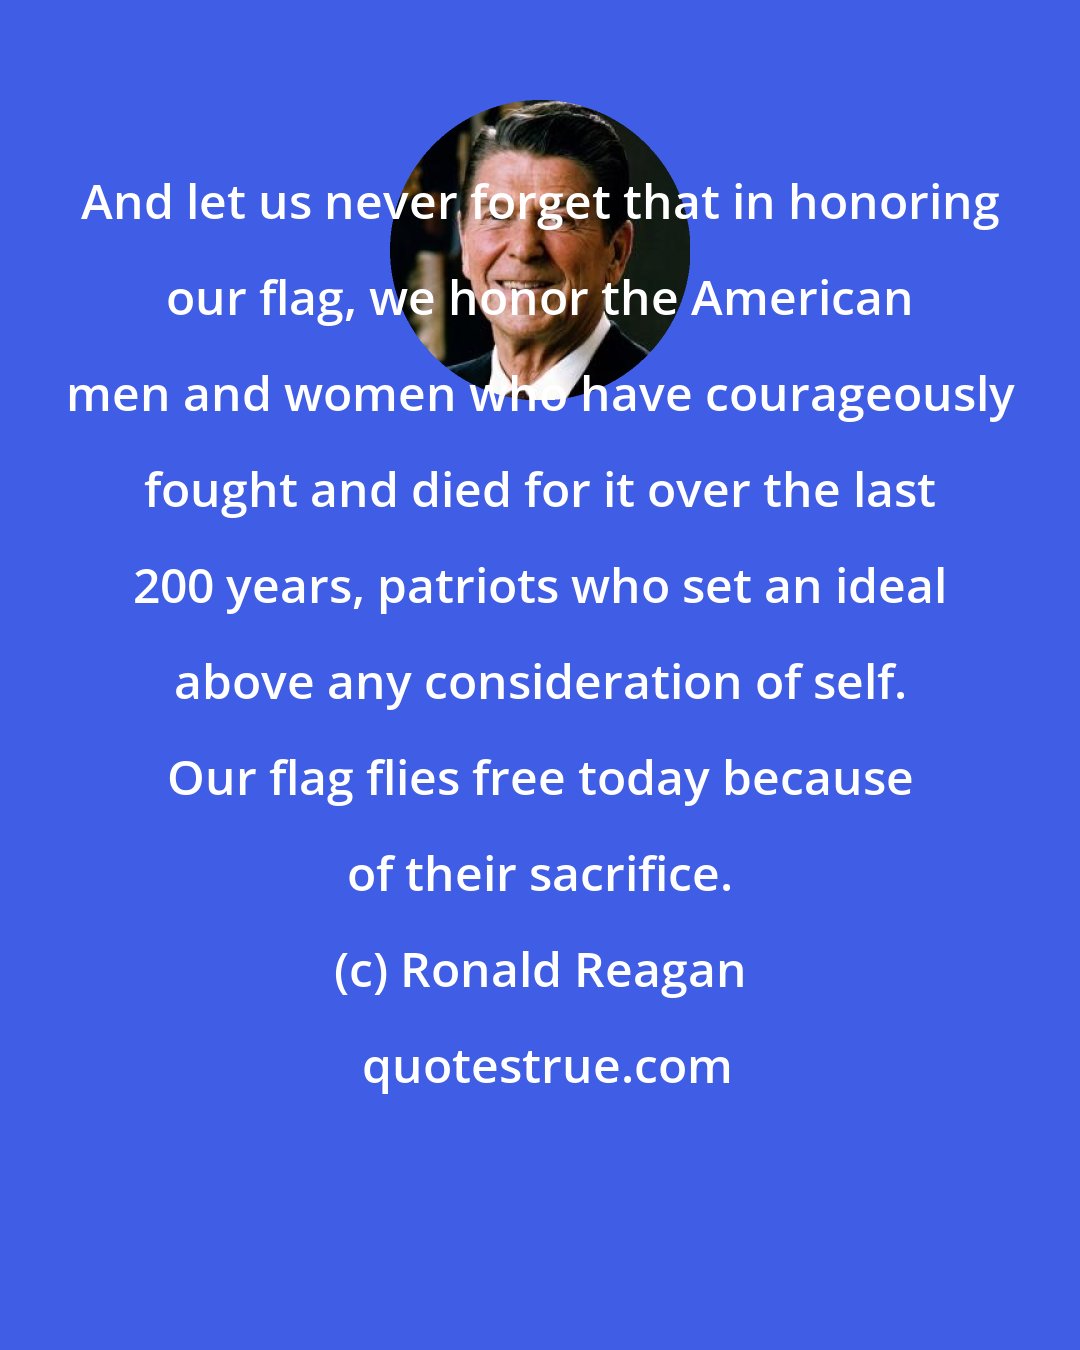 Ronald Reagan: And let us never forget that in honoring our flag, we honor the American men and women who have courageously fought and died for it over the last 200 years, patriots who set an ideal above any consideration of self. Our flag flies free today because of their sacrifice.